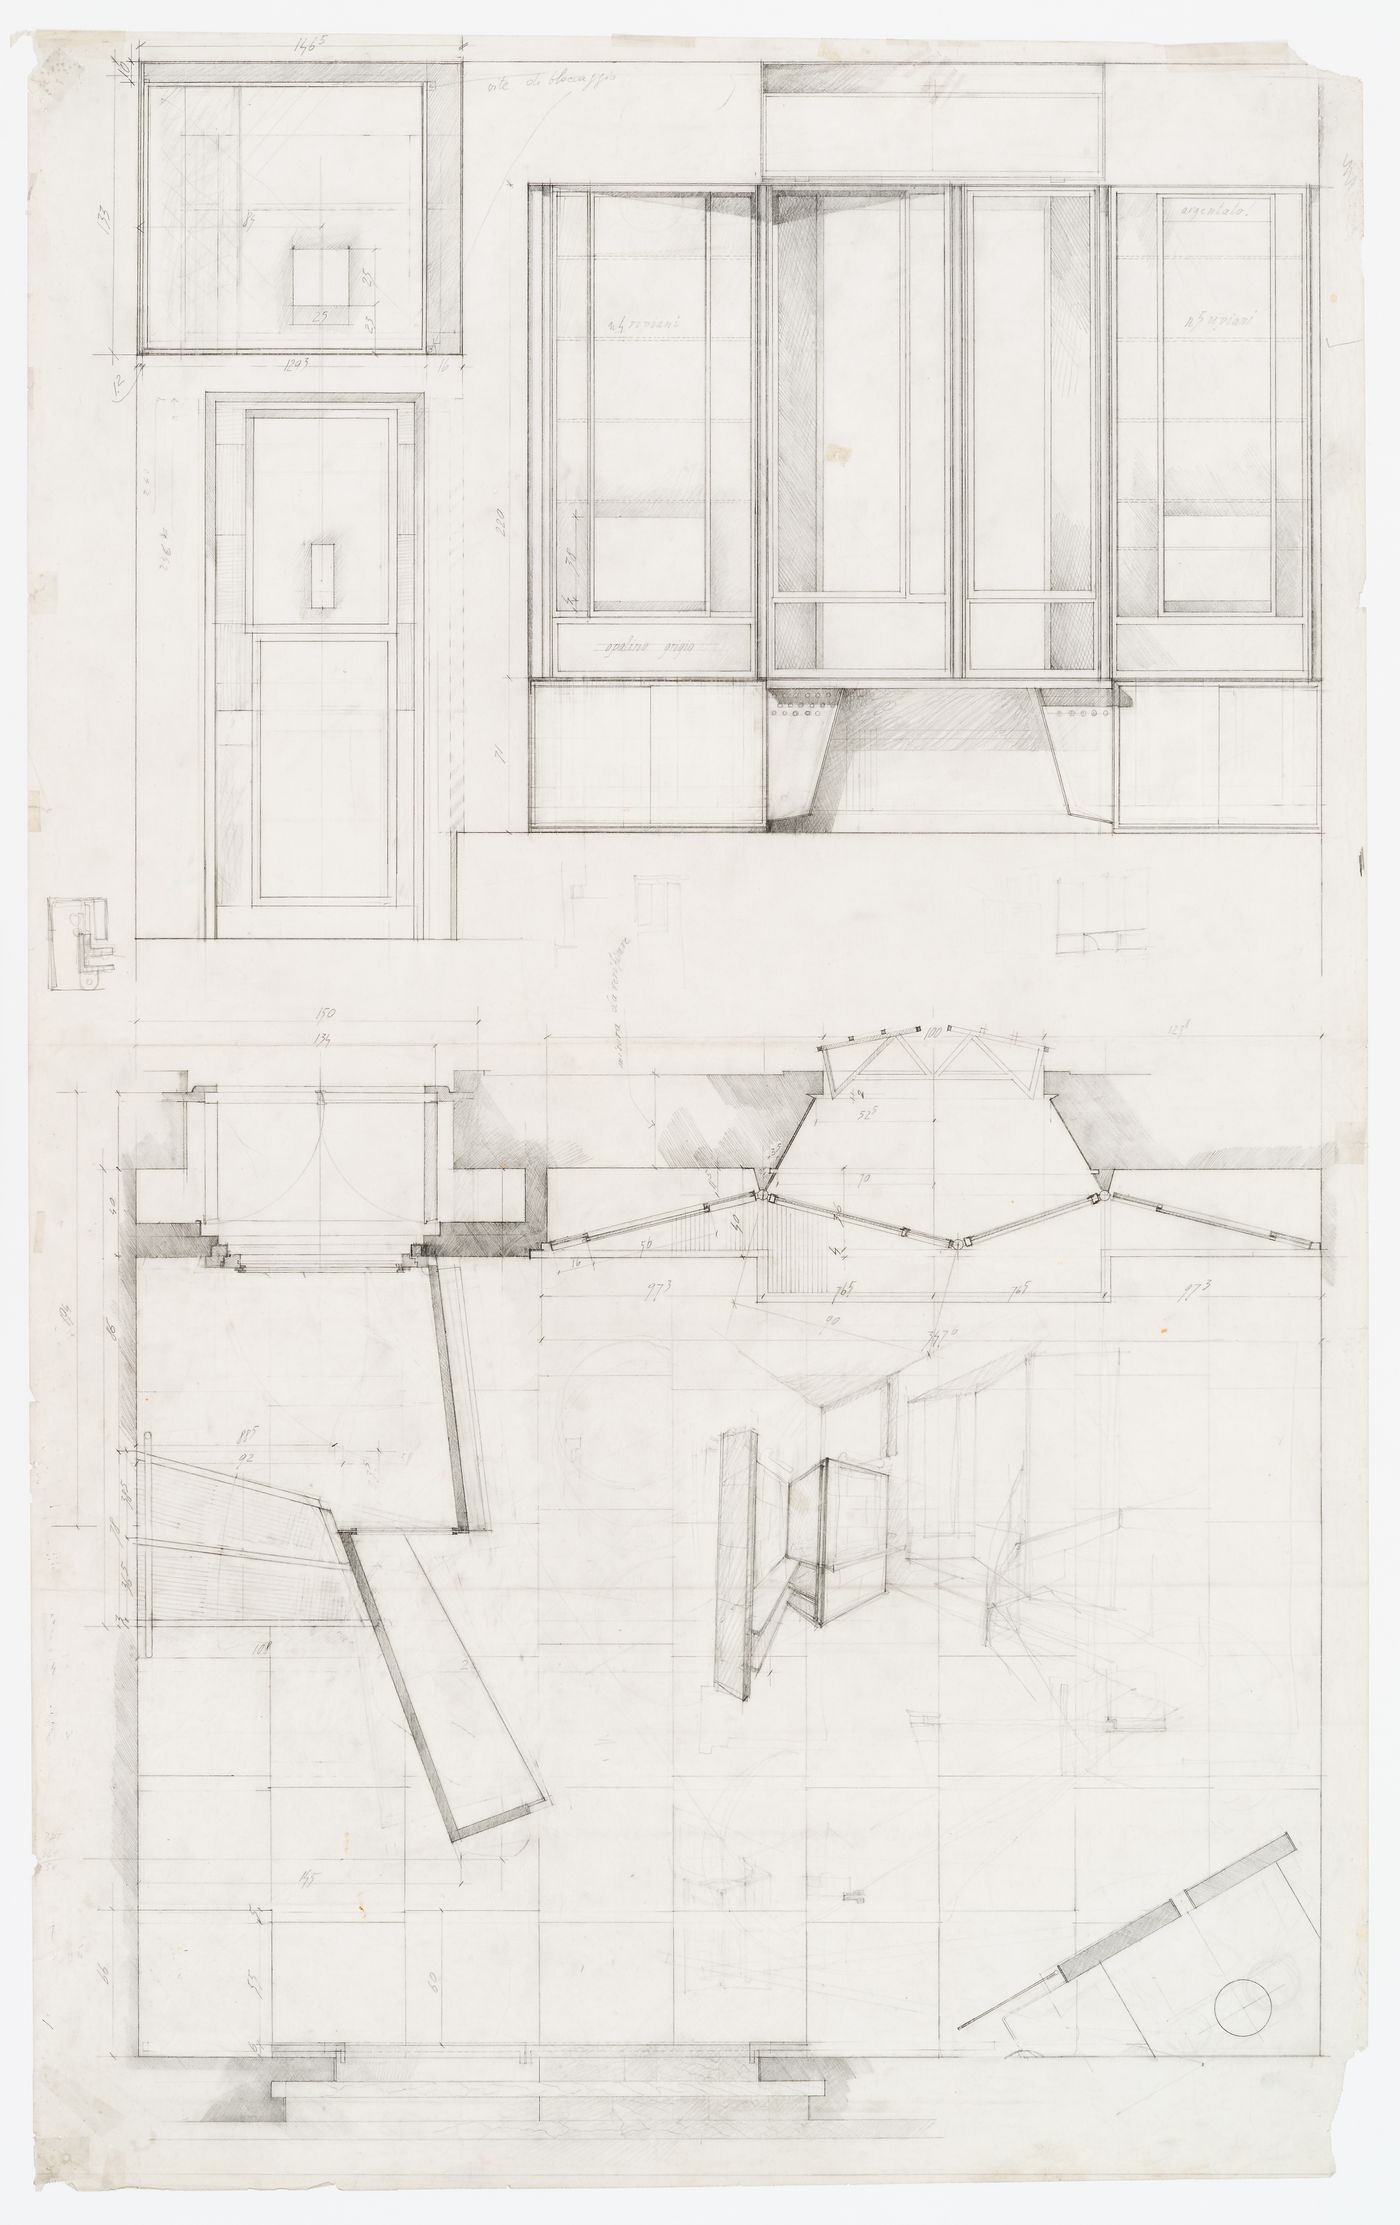 Elevation, plan, and perspective sketch of living room for Casa Frea, Milan, Italy